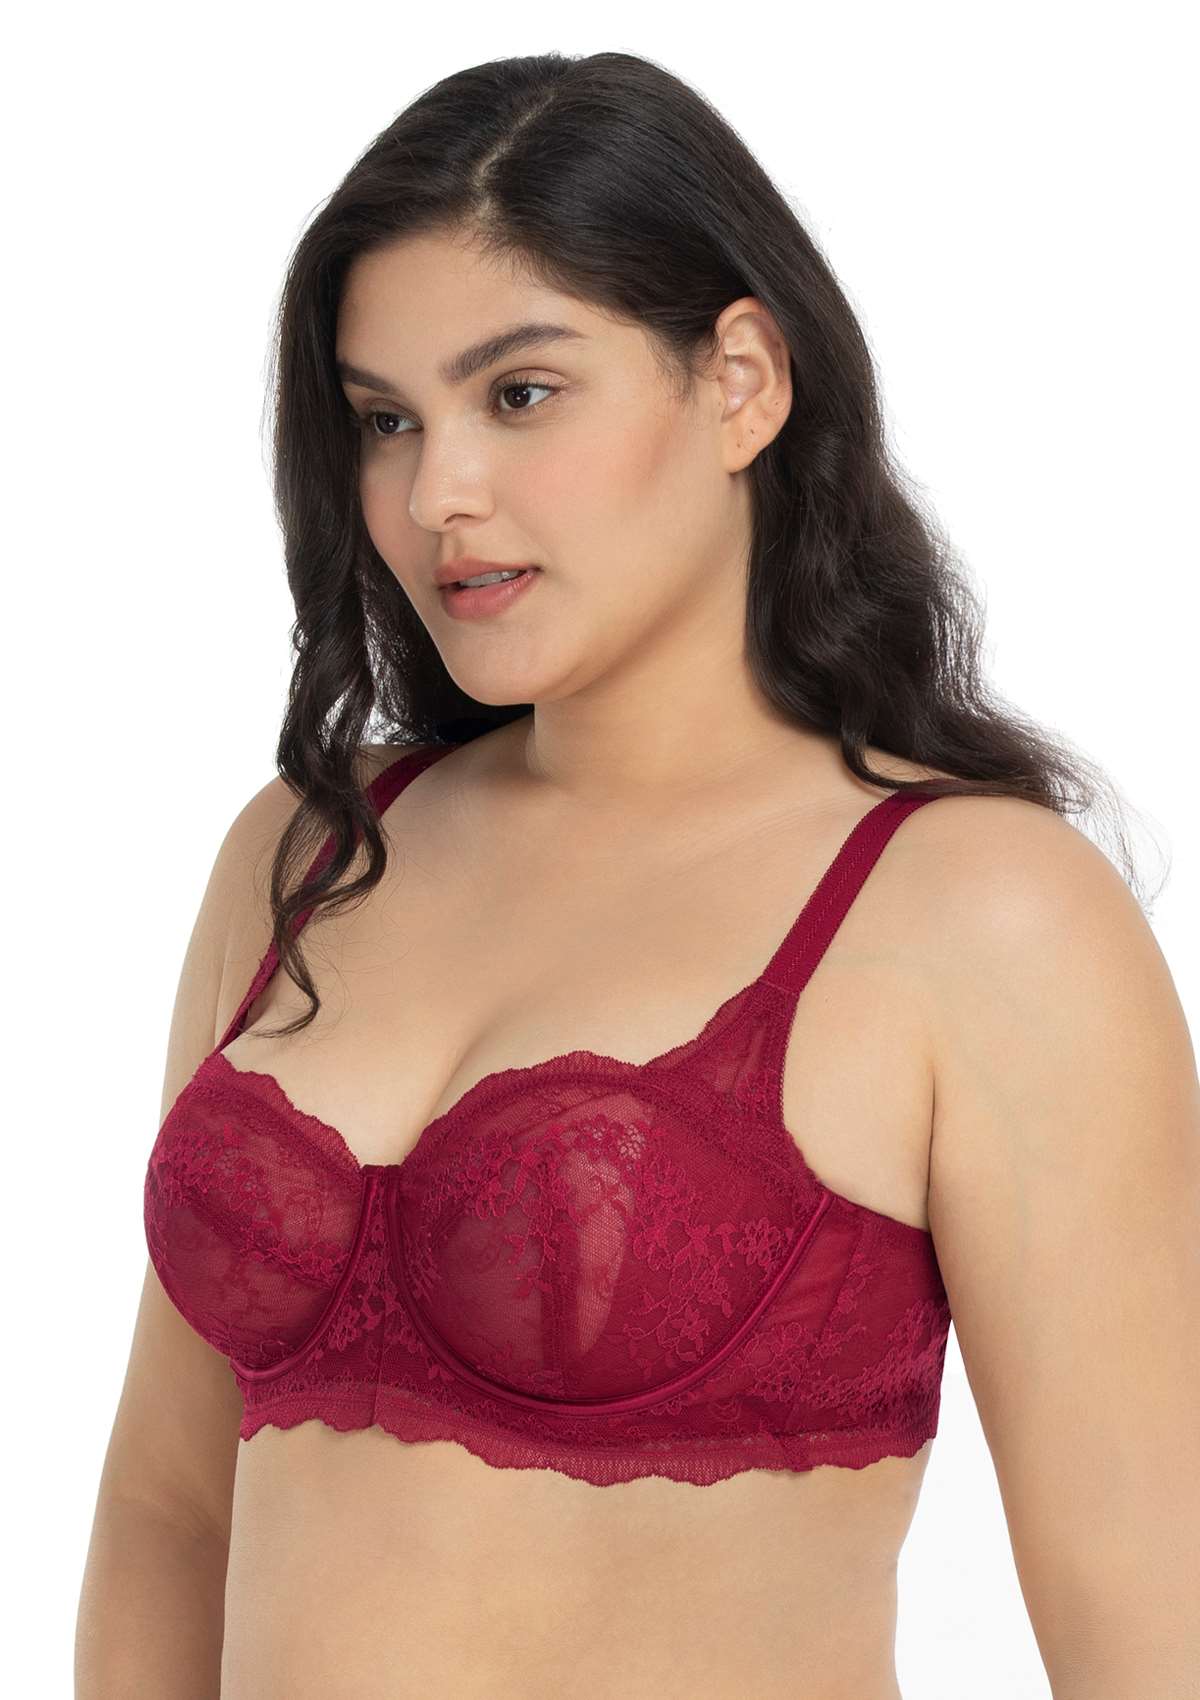 HSIA Floral Lace Unlined Bridal Balconette Bra Set - Supportive Classic - Burgundy / 38 / DD/E